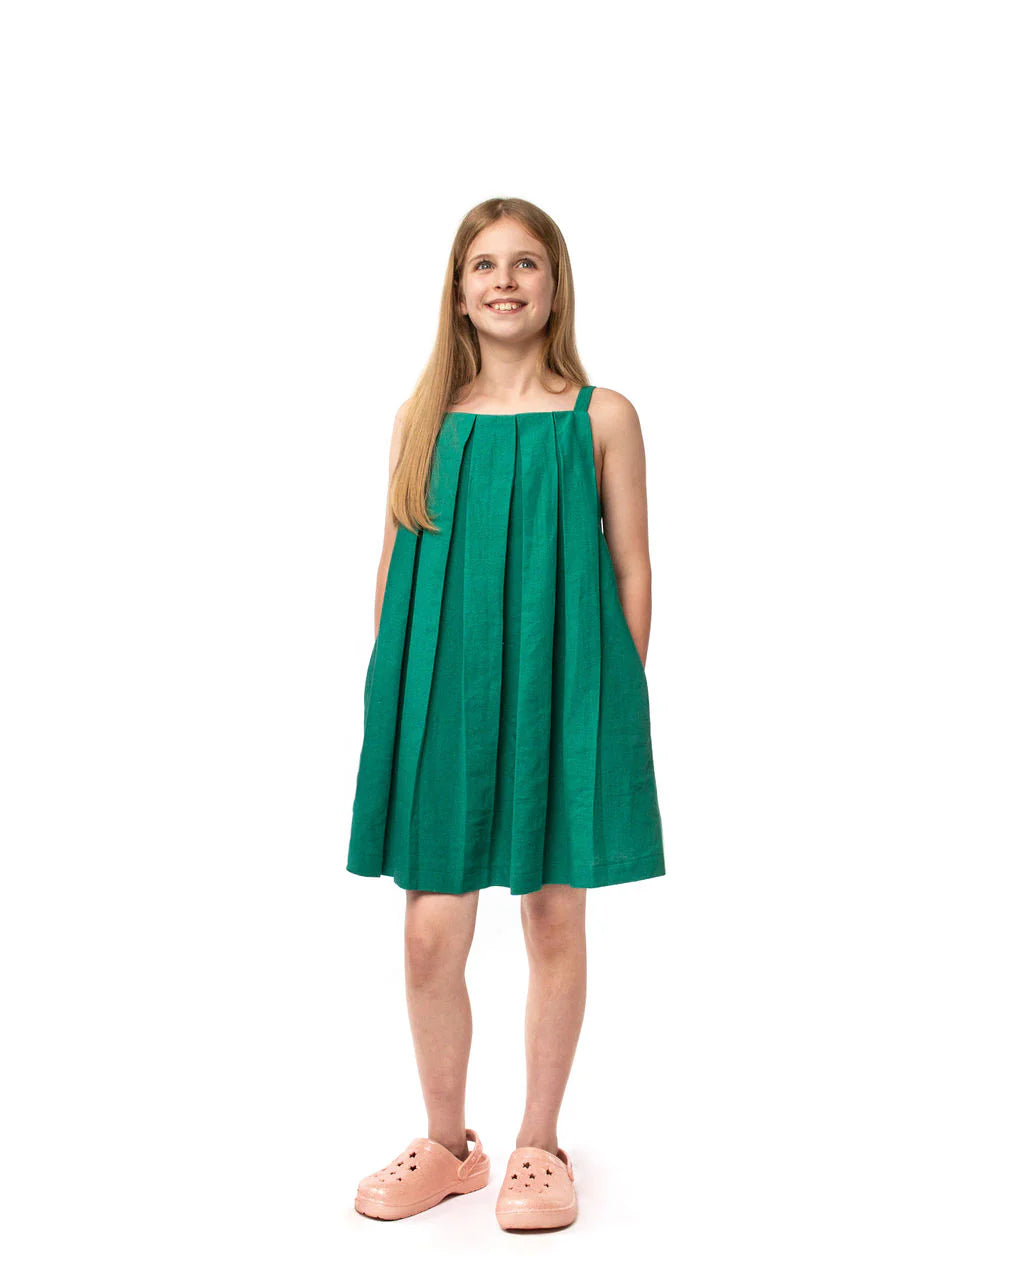 Girl wearing the Child/Teen Ettle Dress sewing pattern from Little Rosy Cheeks on The Fold Line. A trapeze dress with a pleated front and adjustable straps.